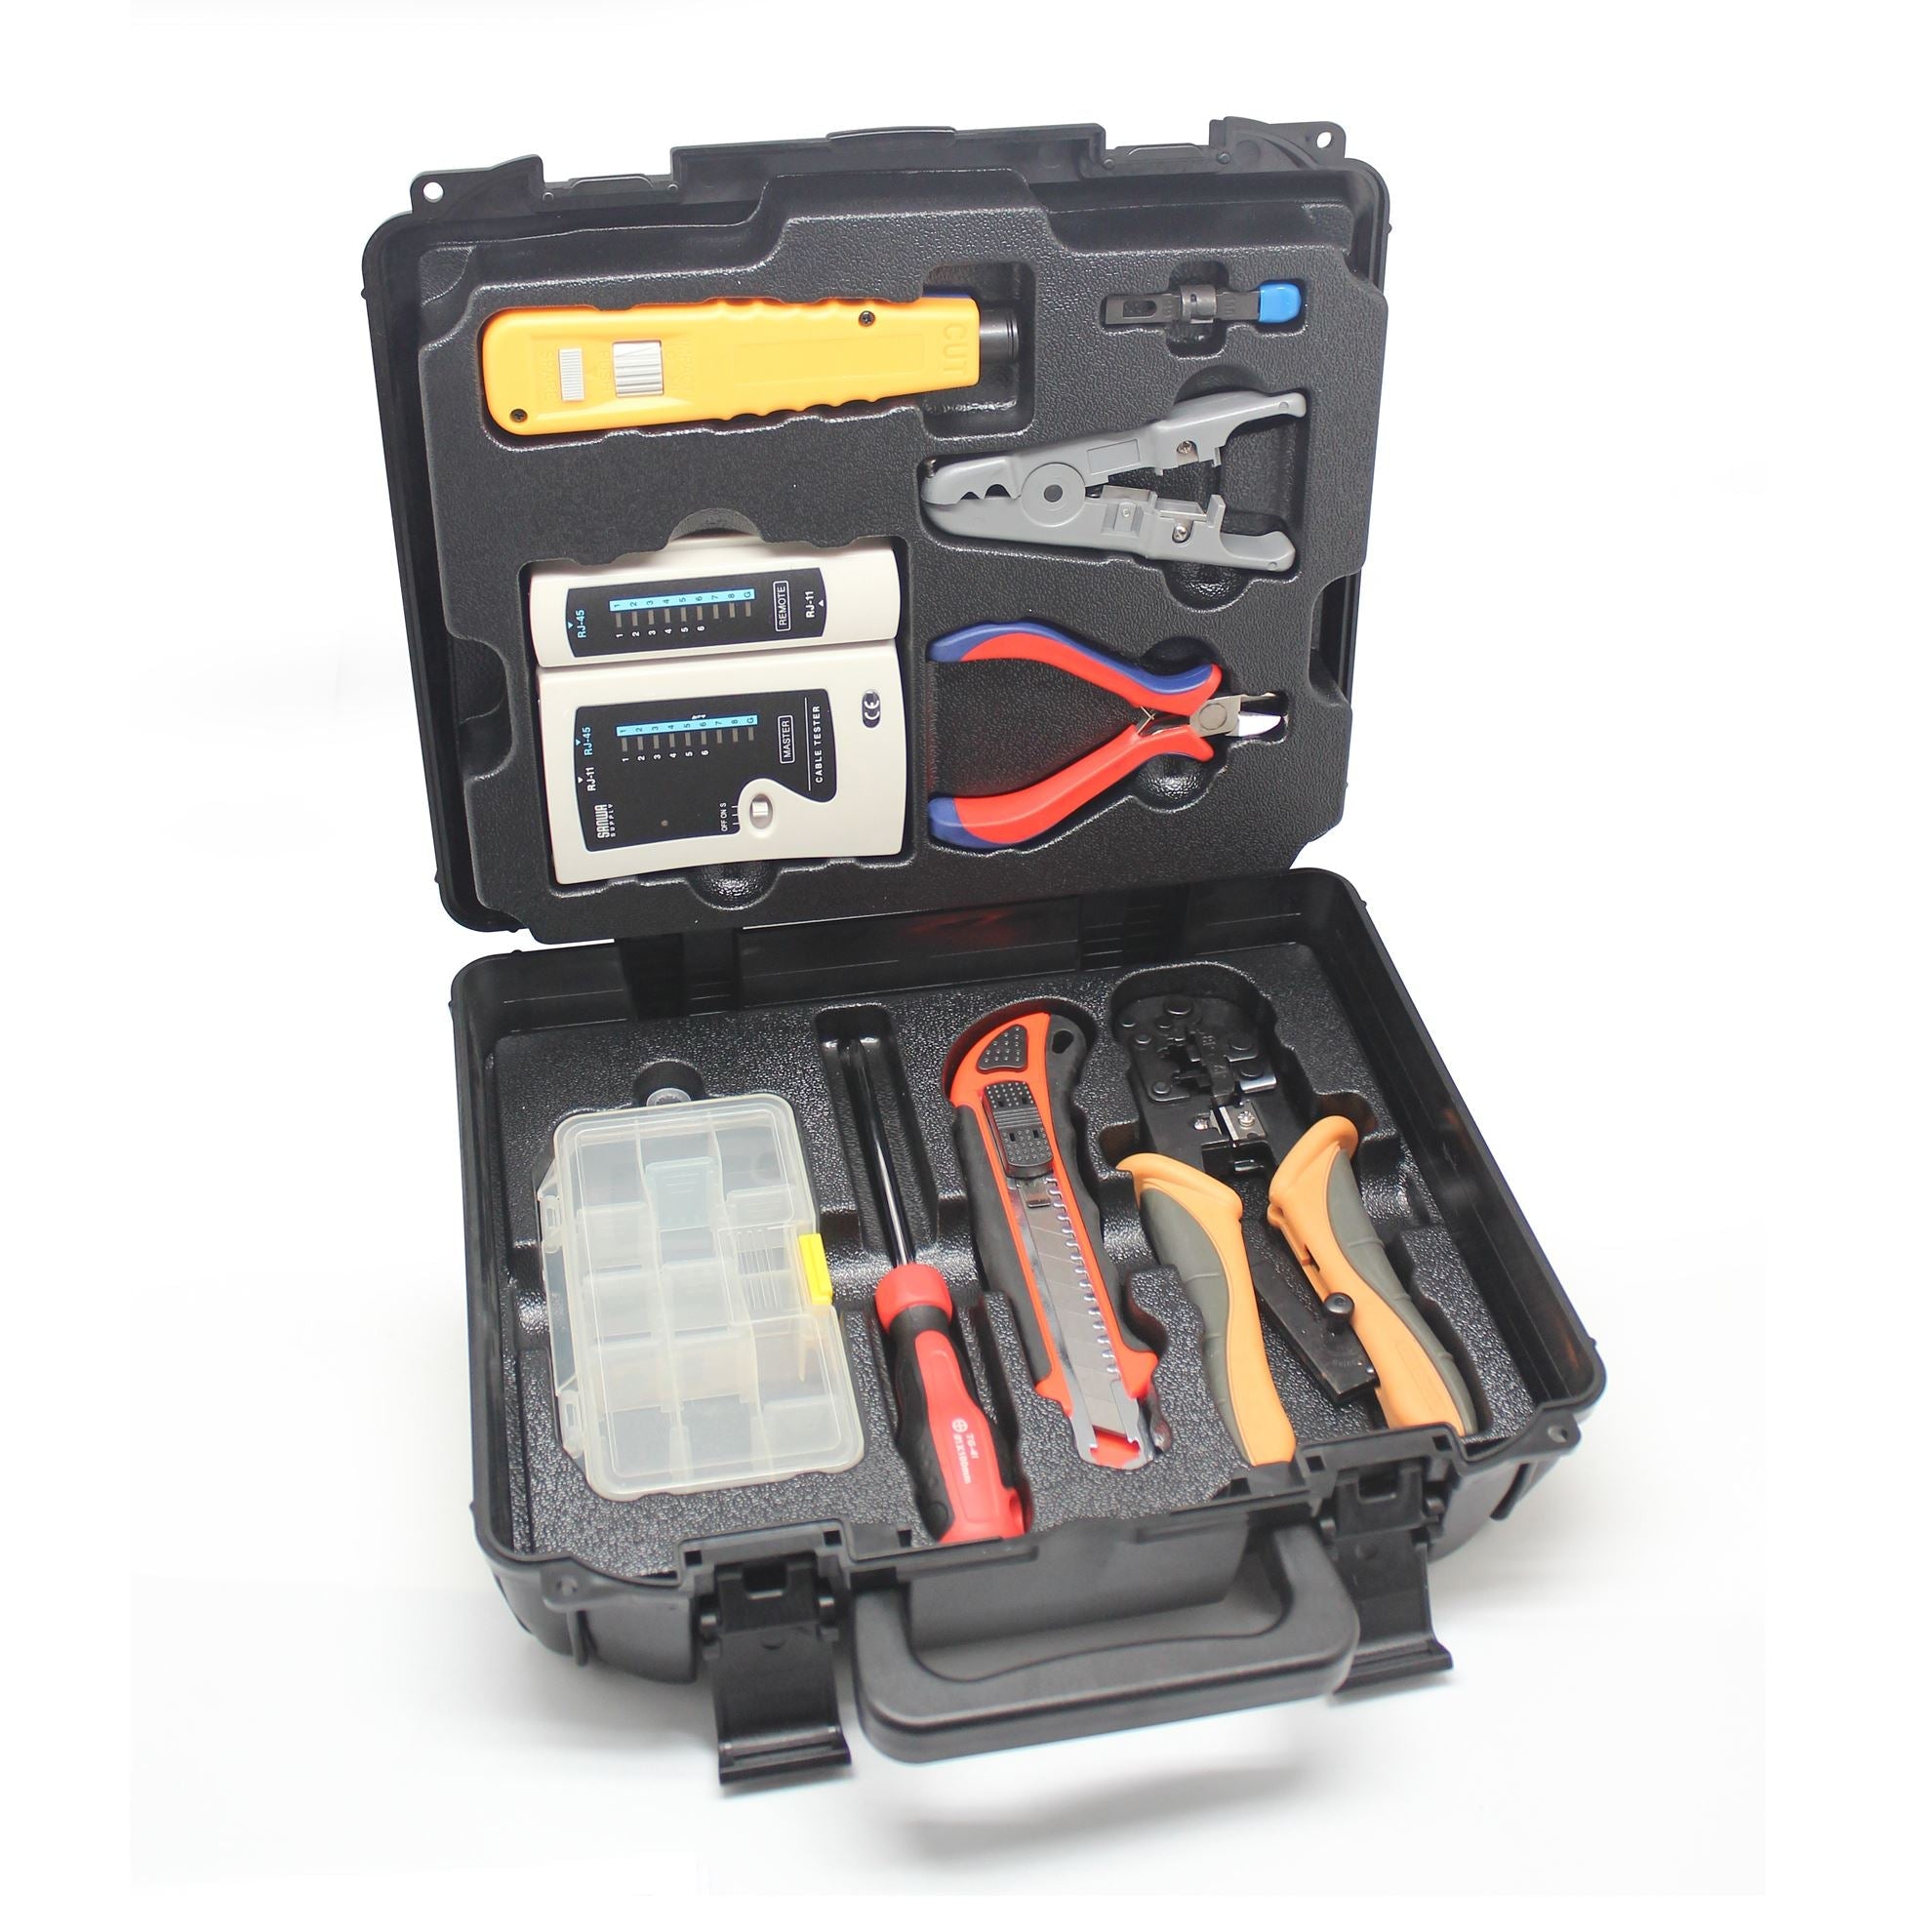 GOLDTOOL_9_Piece_LAN_Basic_Repair_Tool_Kit_with_Heavy_Duty_Plastic_Case._Includes_Punch_Down_Tool_LAN_Cable_Tester_Modular_Crimping_Tool_Stripper_&_Cutter_Diagonal_Cutter_Utility_Knife_&_Much_More